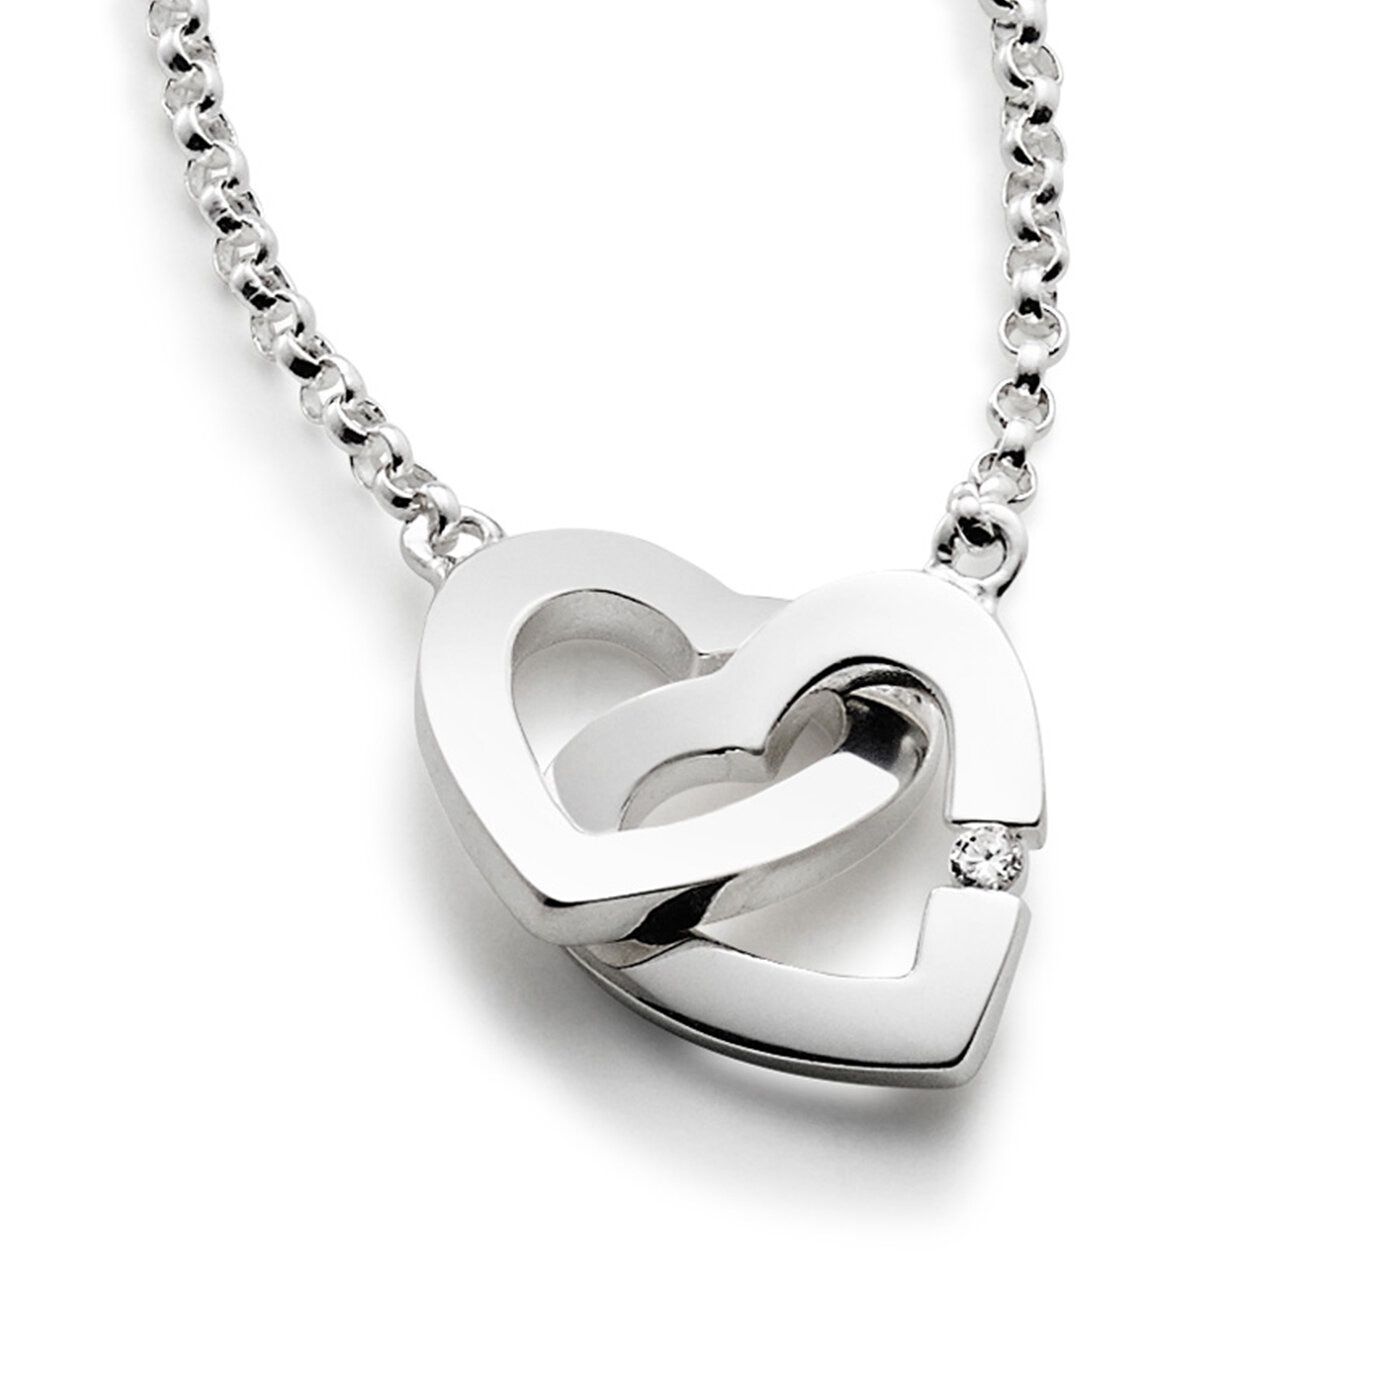 Two hearts necklace